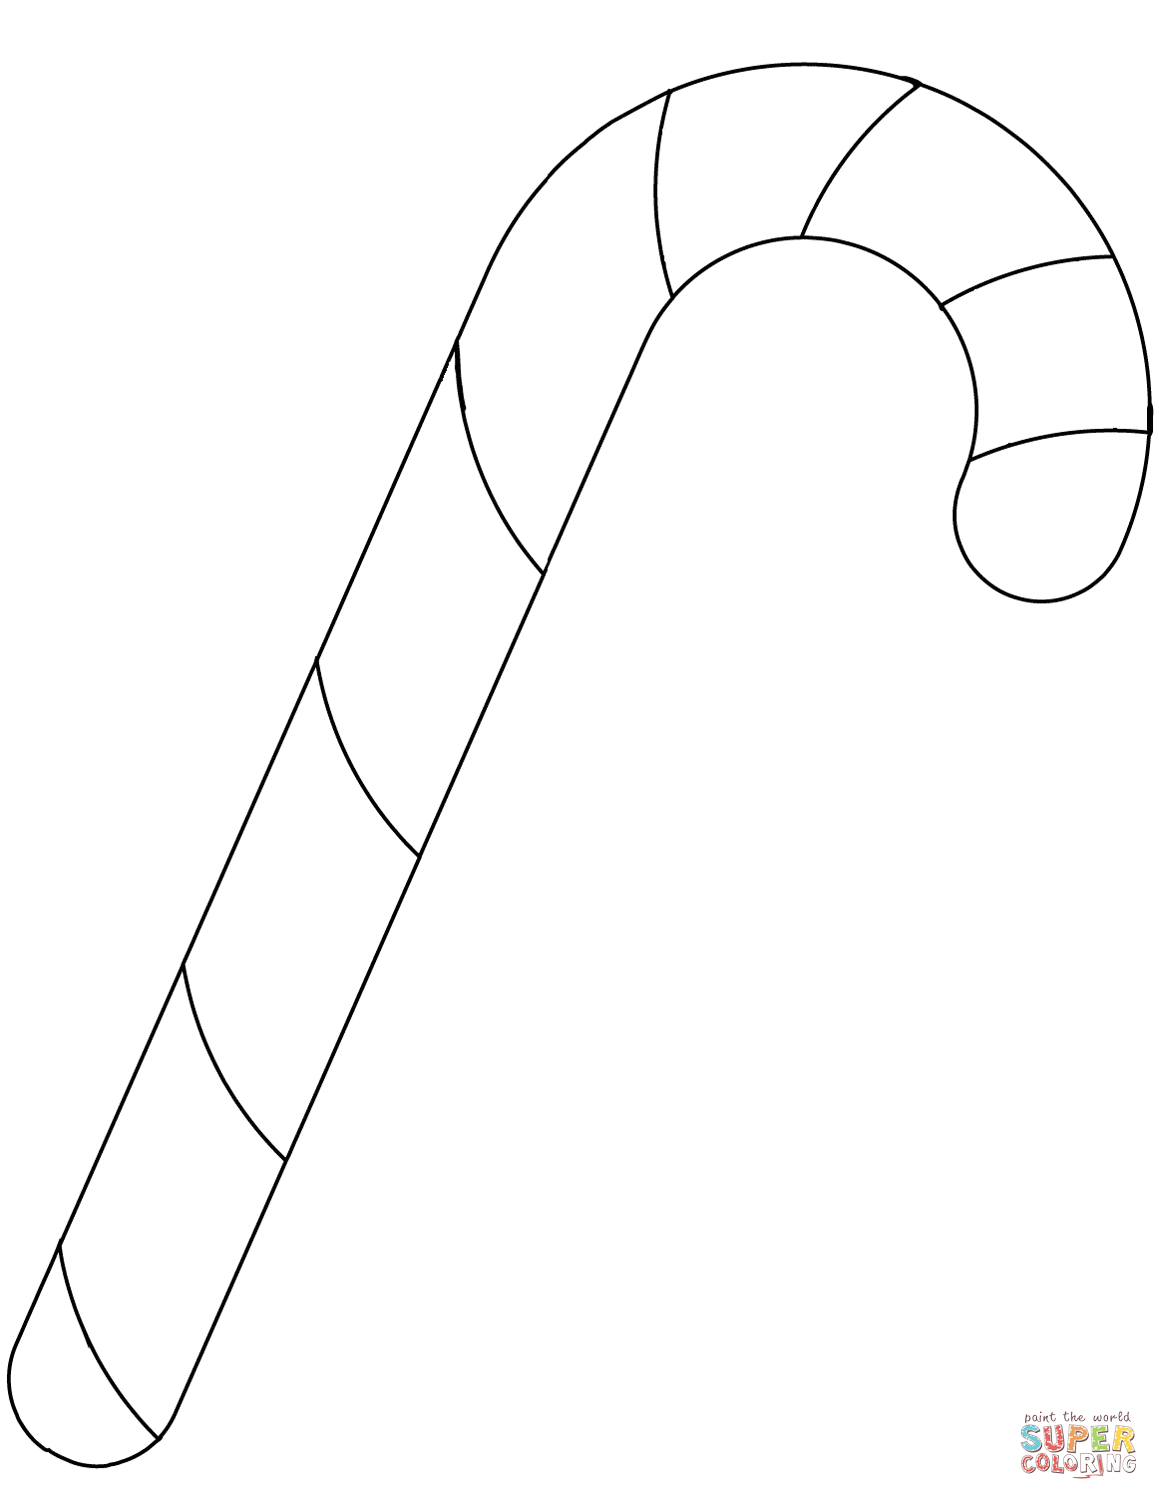 Candy Cane Coloring Page | Free Printable Coloring Pages - Free Candy Cane Template Printable